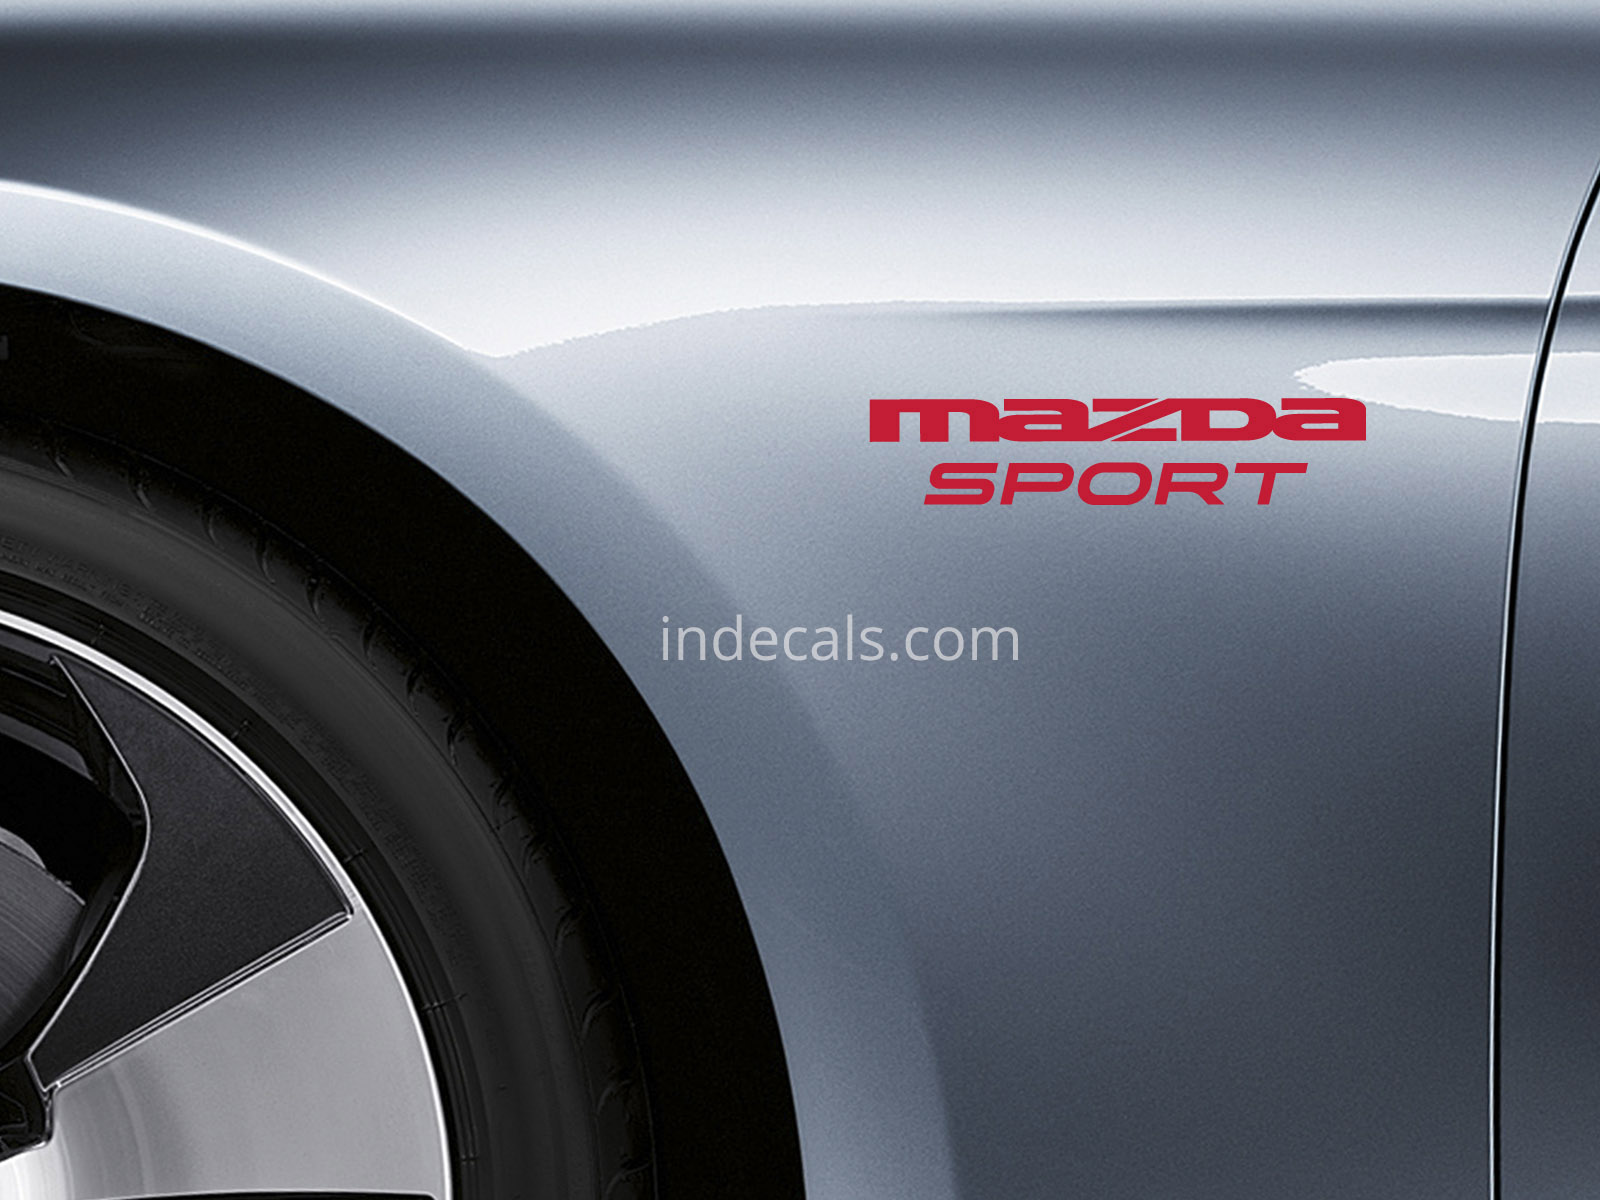 2 x Mazda Sports stickers for Wings - Red